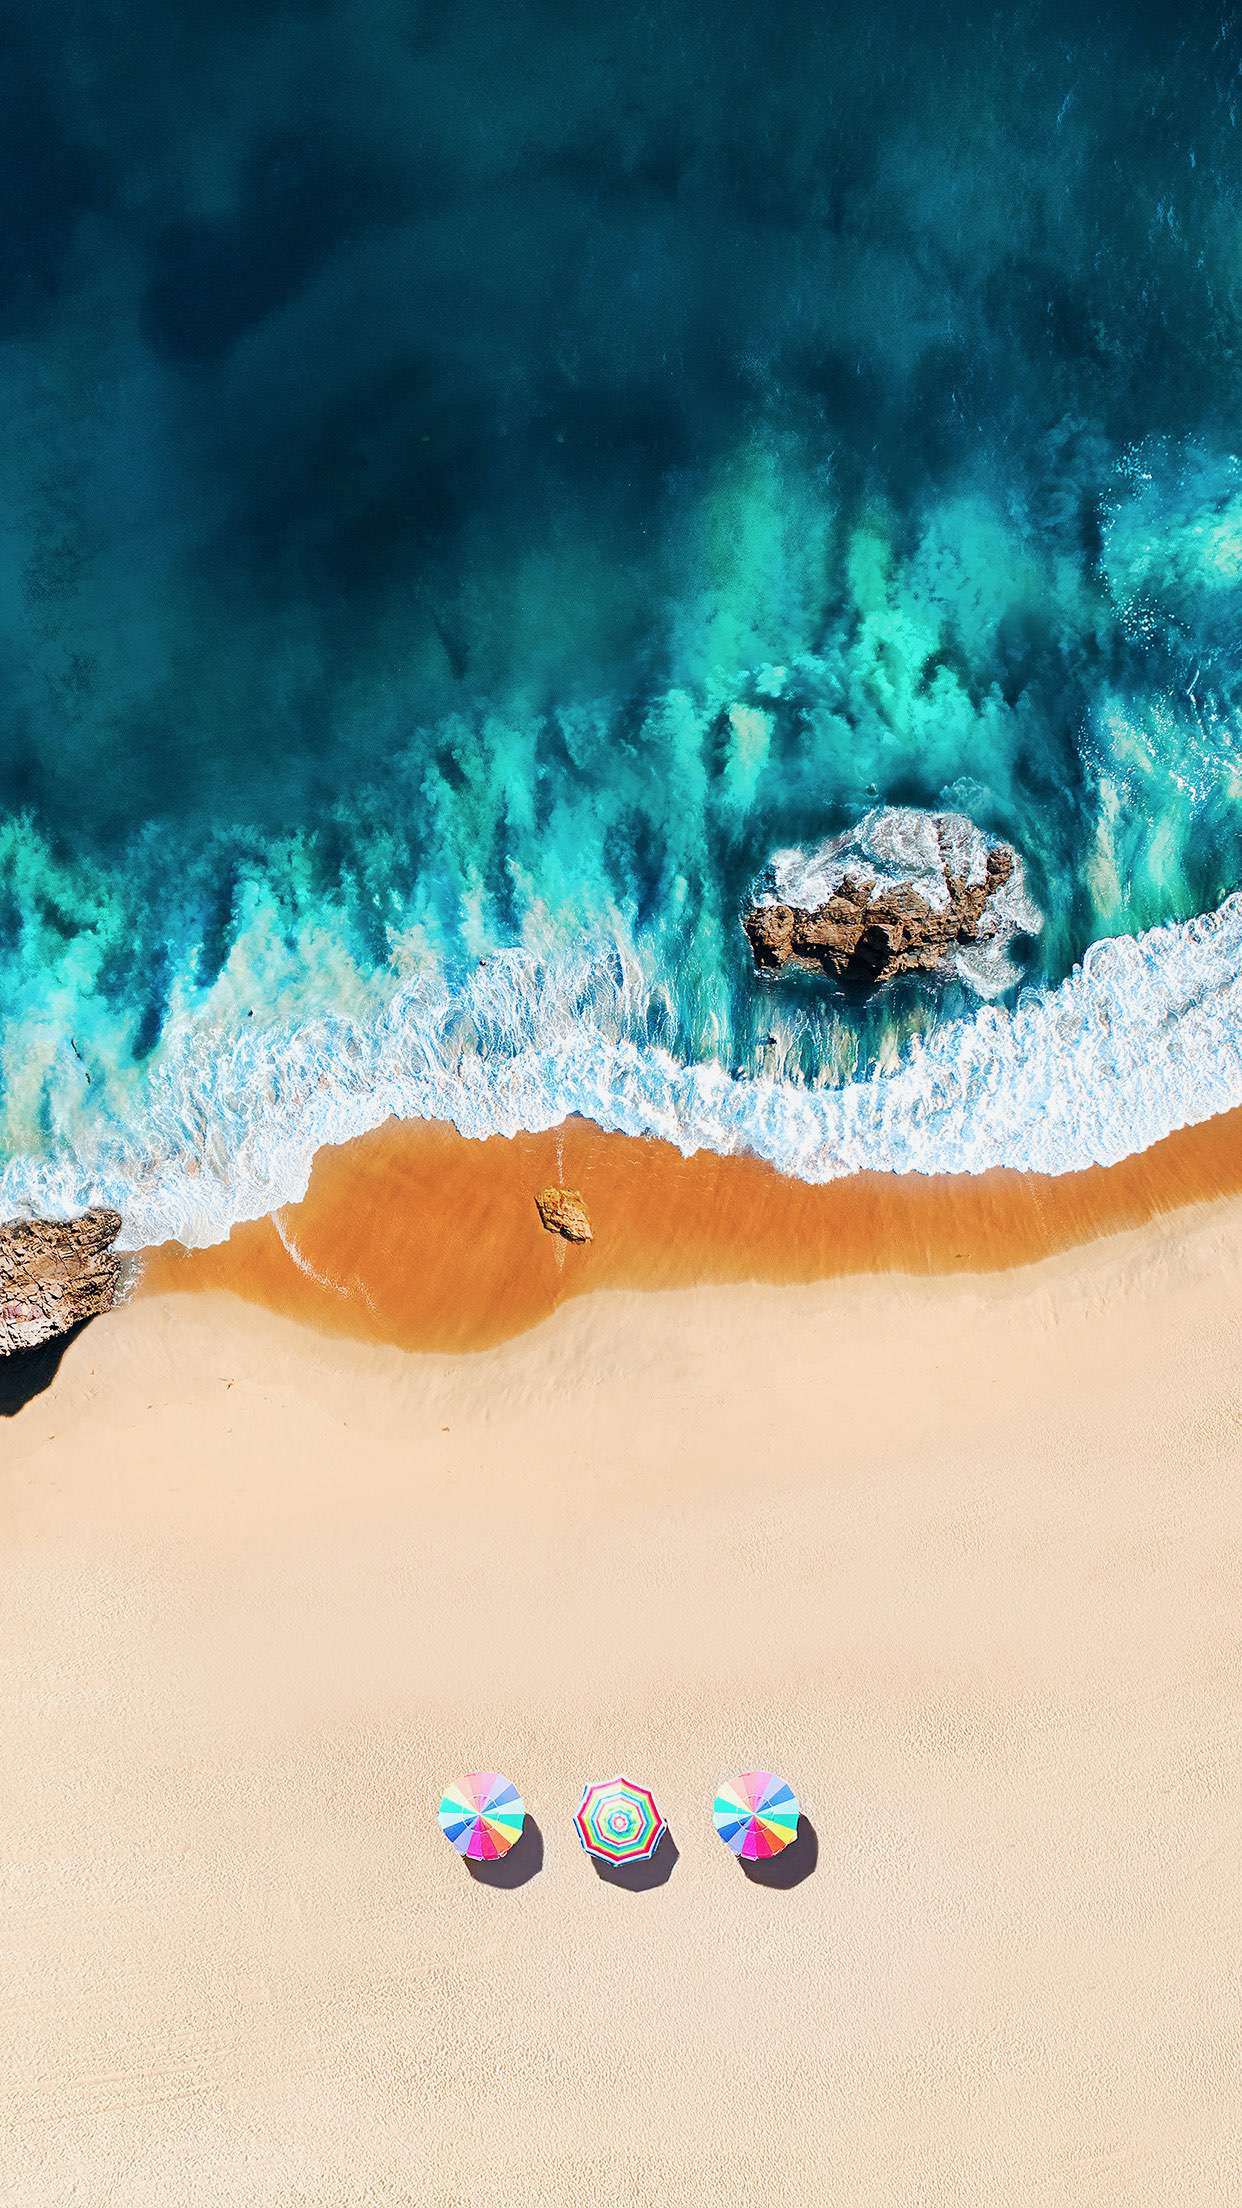 Beach Wallpaper For iPhone X And Other Devices Ep. 6